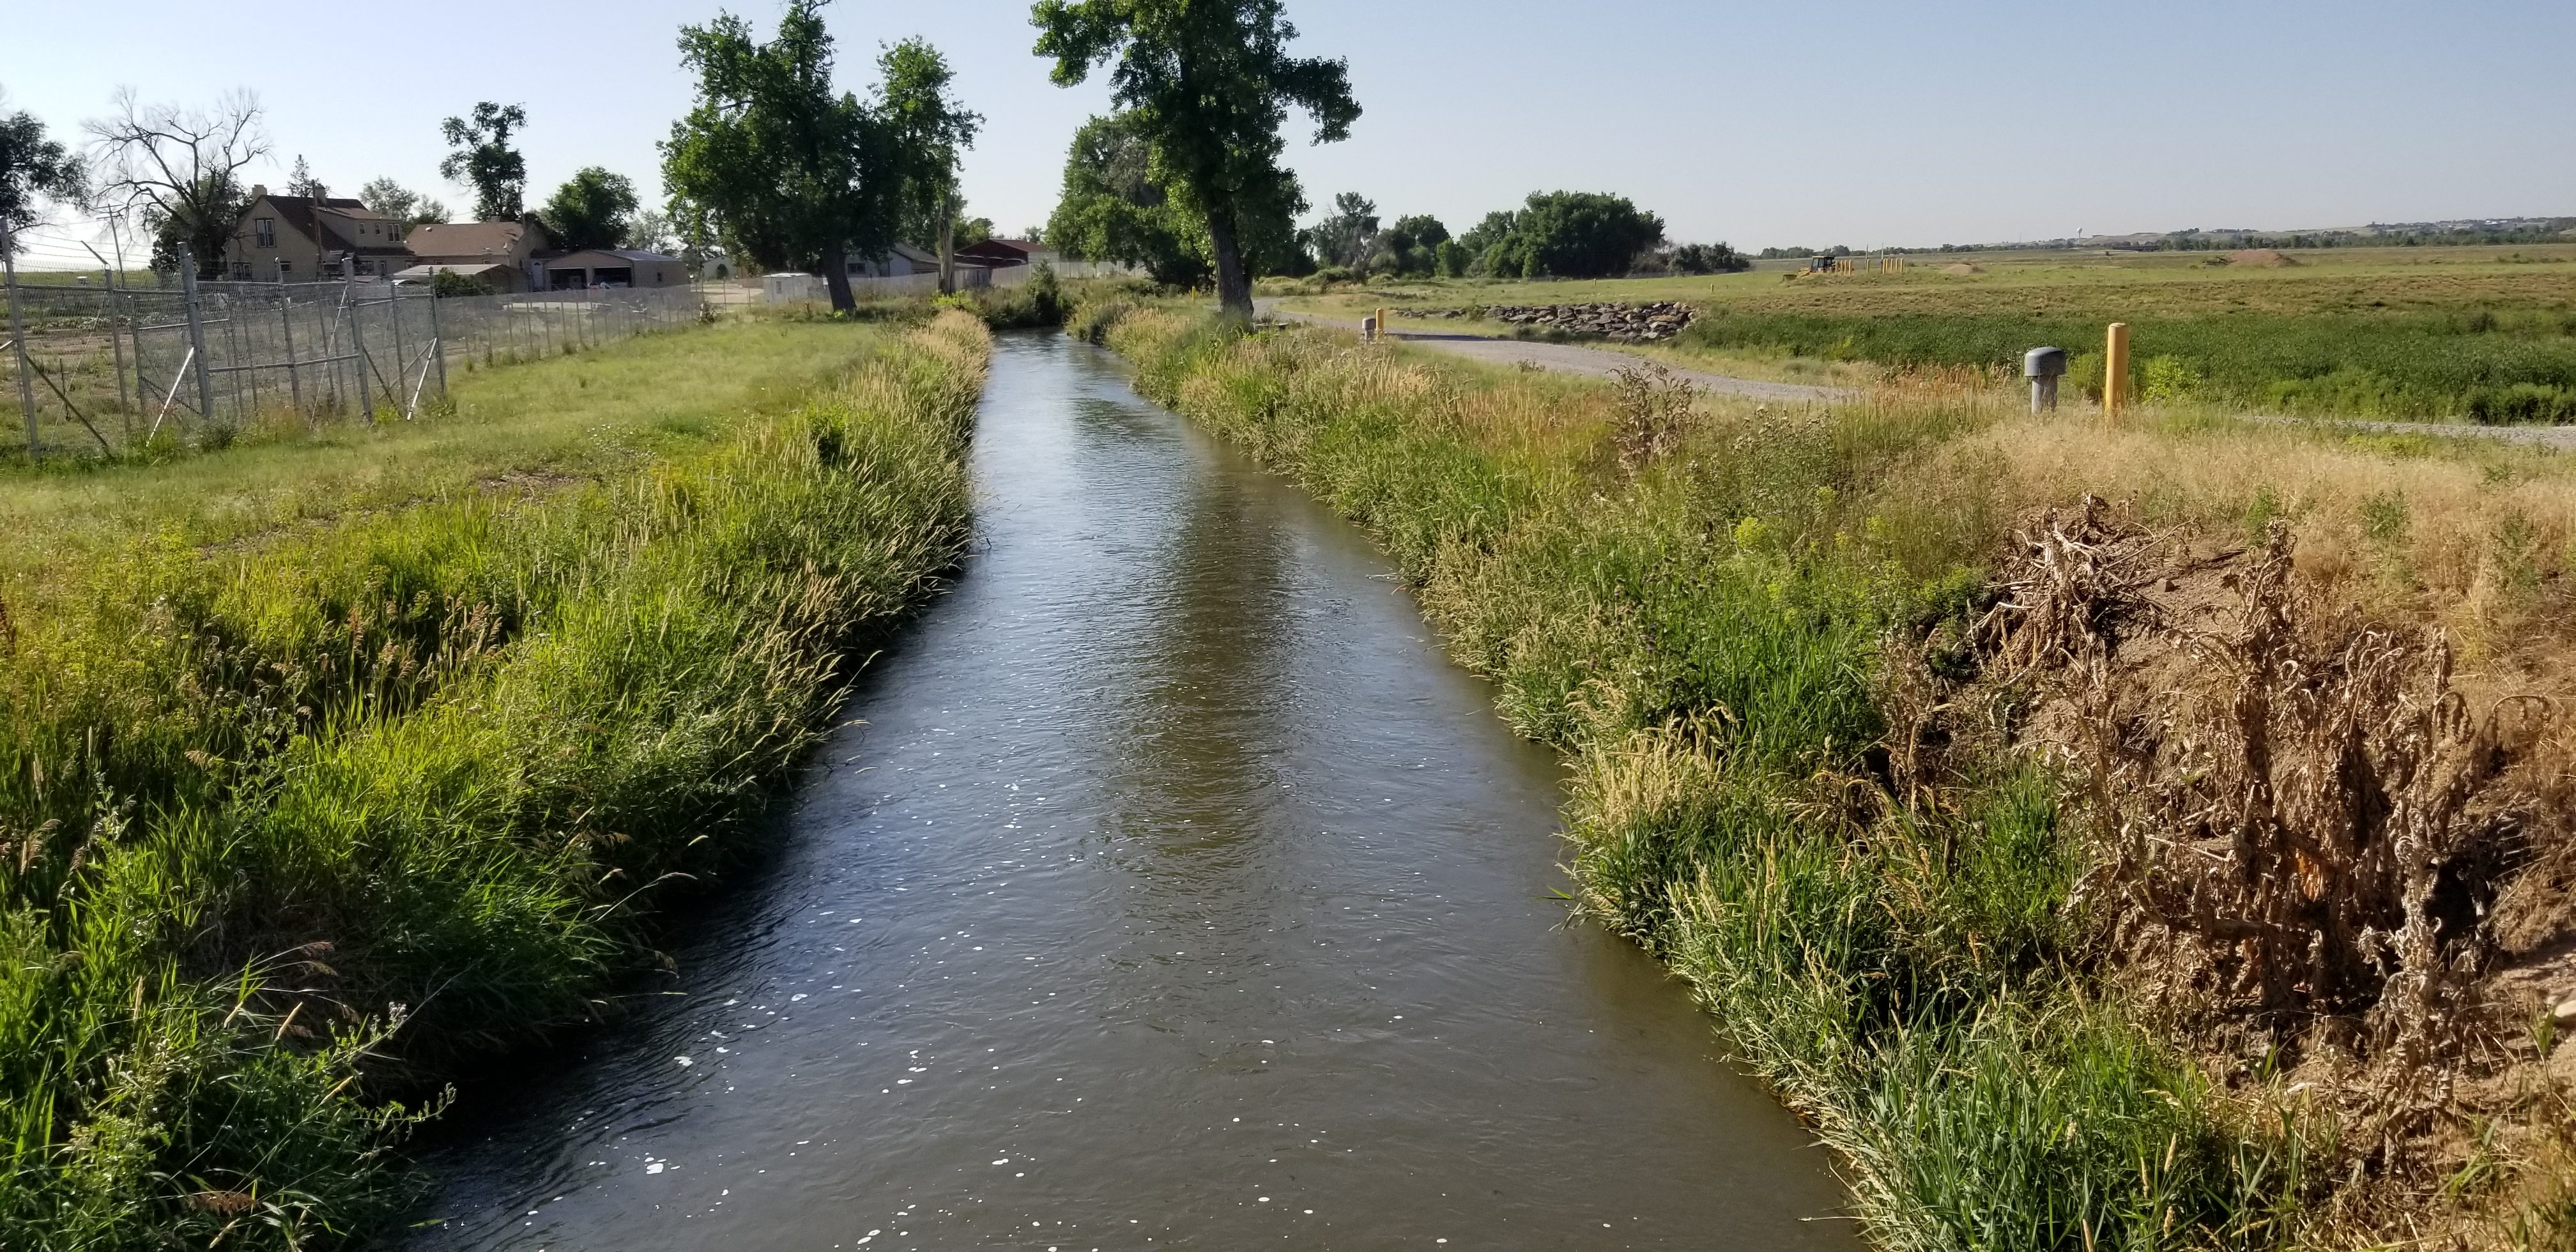 The Fulton Ditch brings water from the South Platte River to North Complex reservoirs near Brighton.